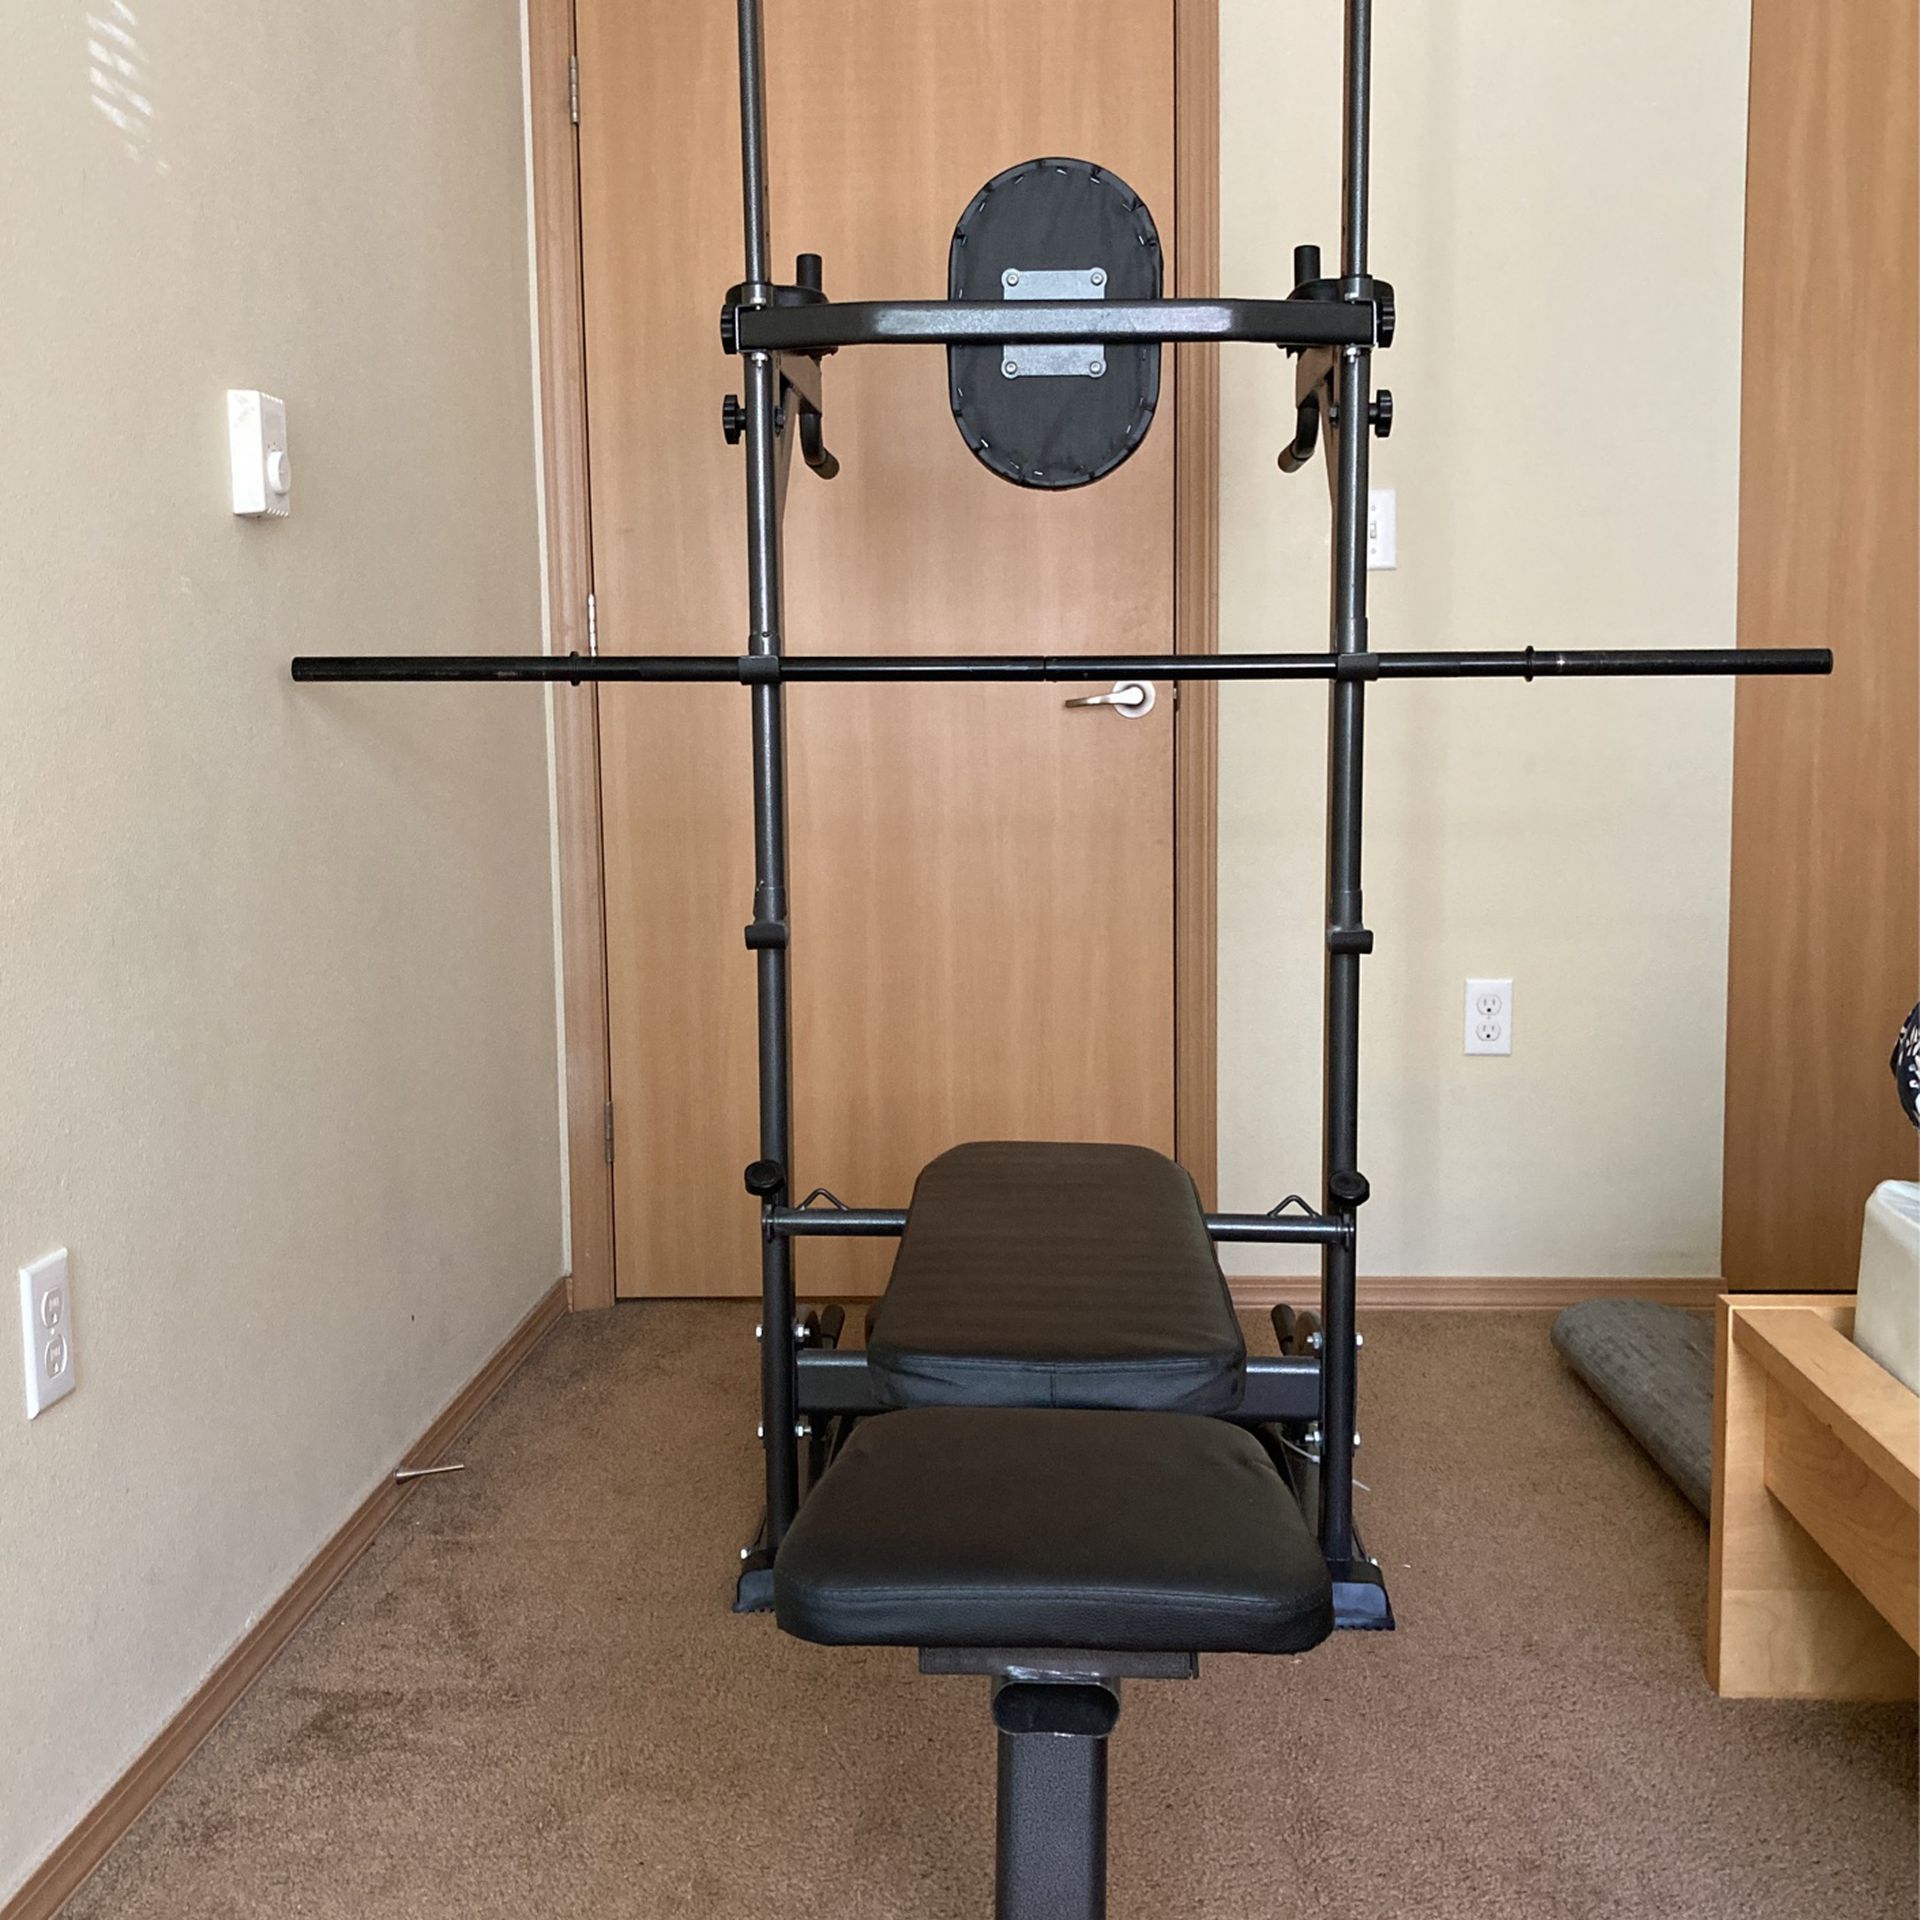 Bench Press/ Dips/pull Ups Station With Weights 